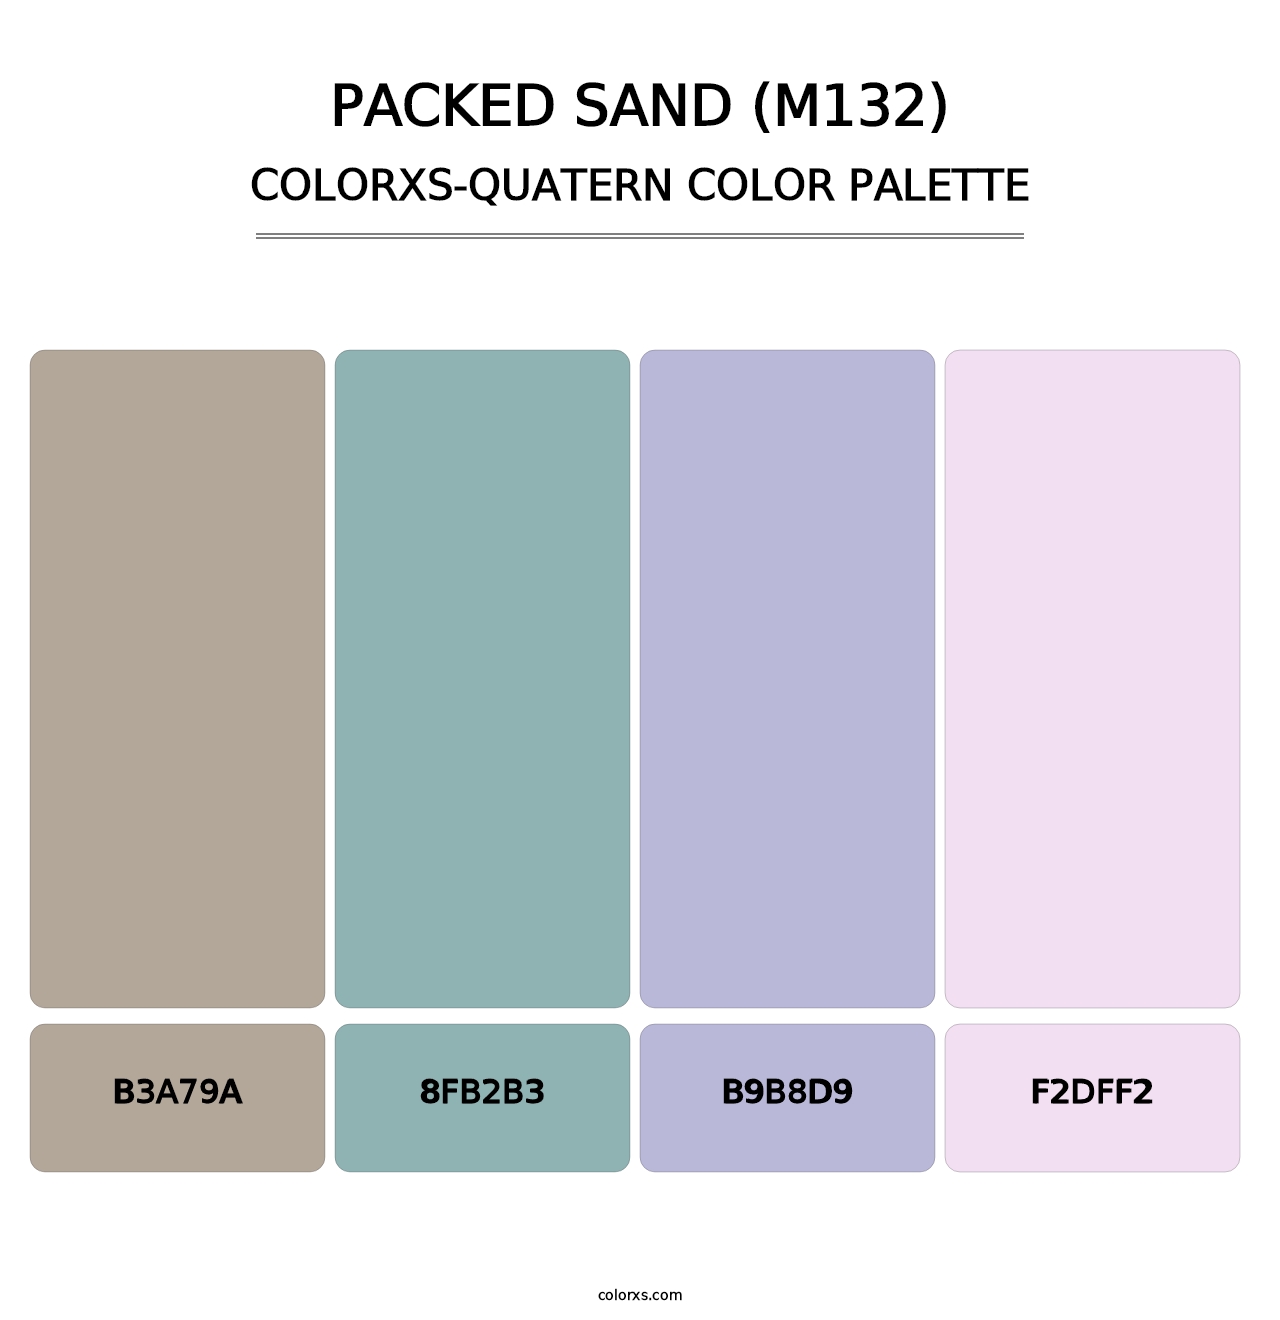 Packed Sand (M132) - Colorxs Quatern Palette